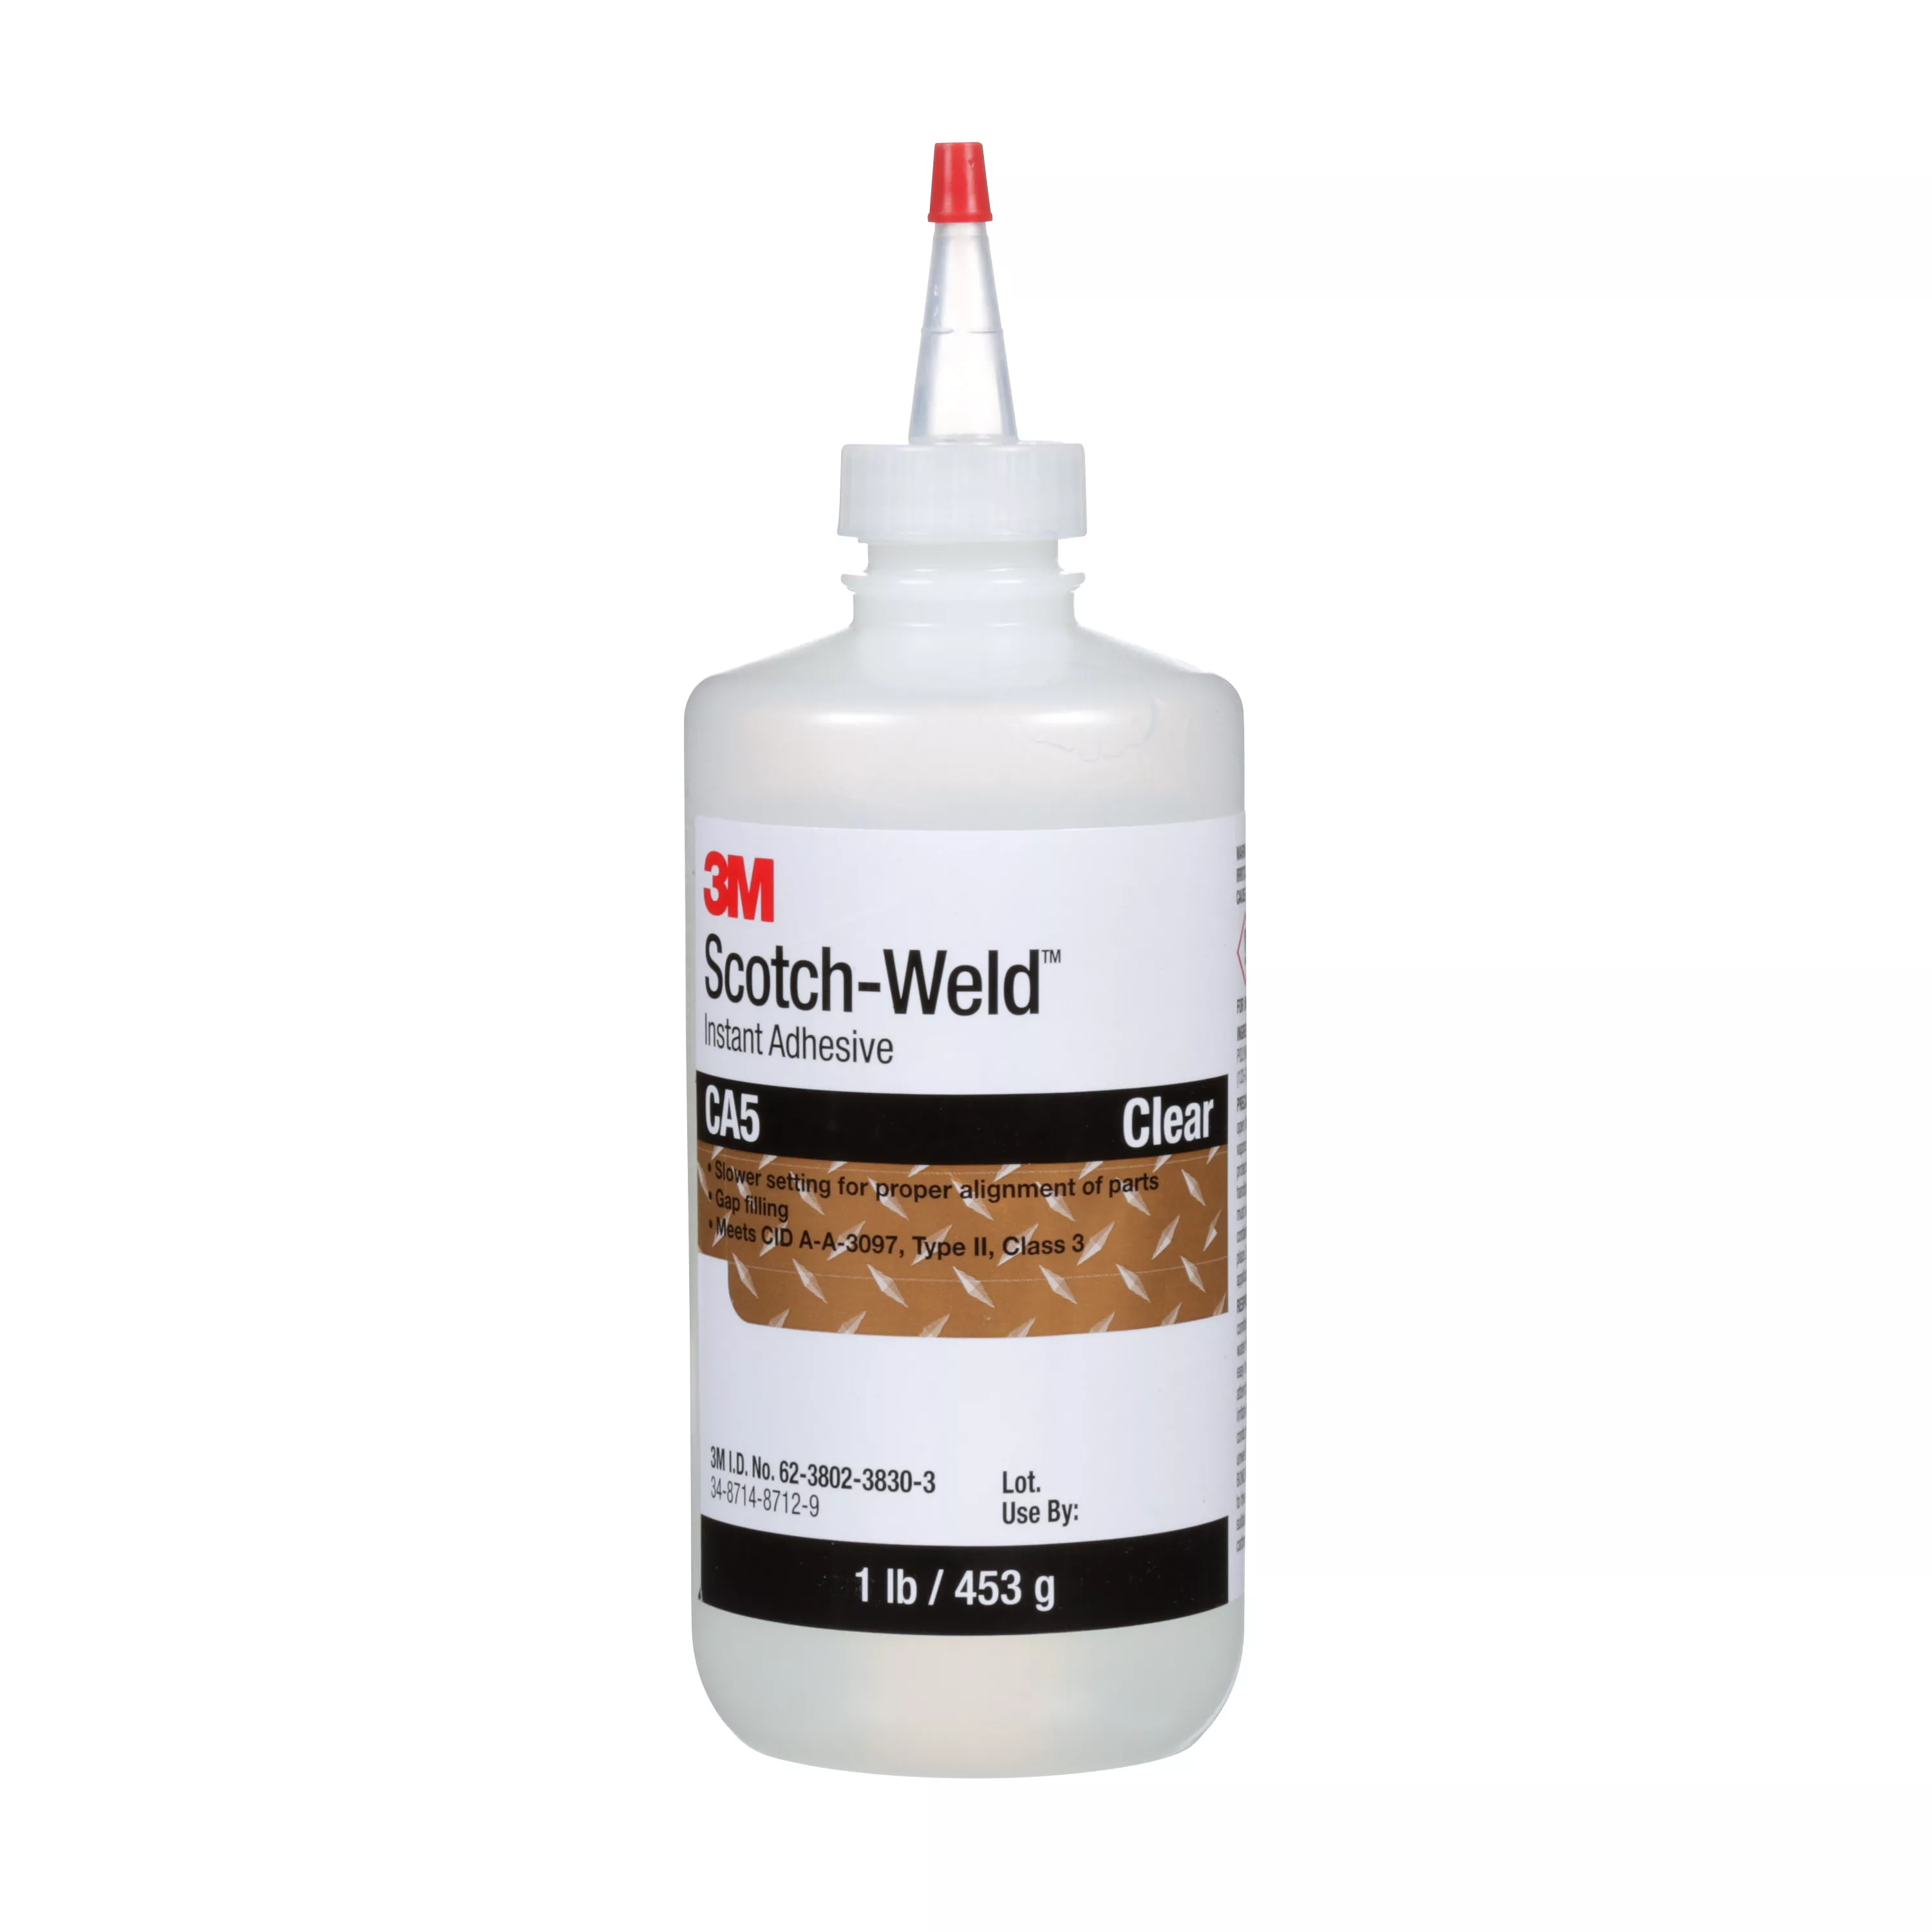 3M™ Scotch-Weld™ Instant Adhesive CA5, Clear, 1 Pound, 1 Bottle/Case